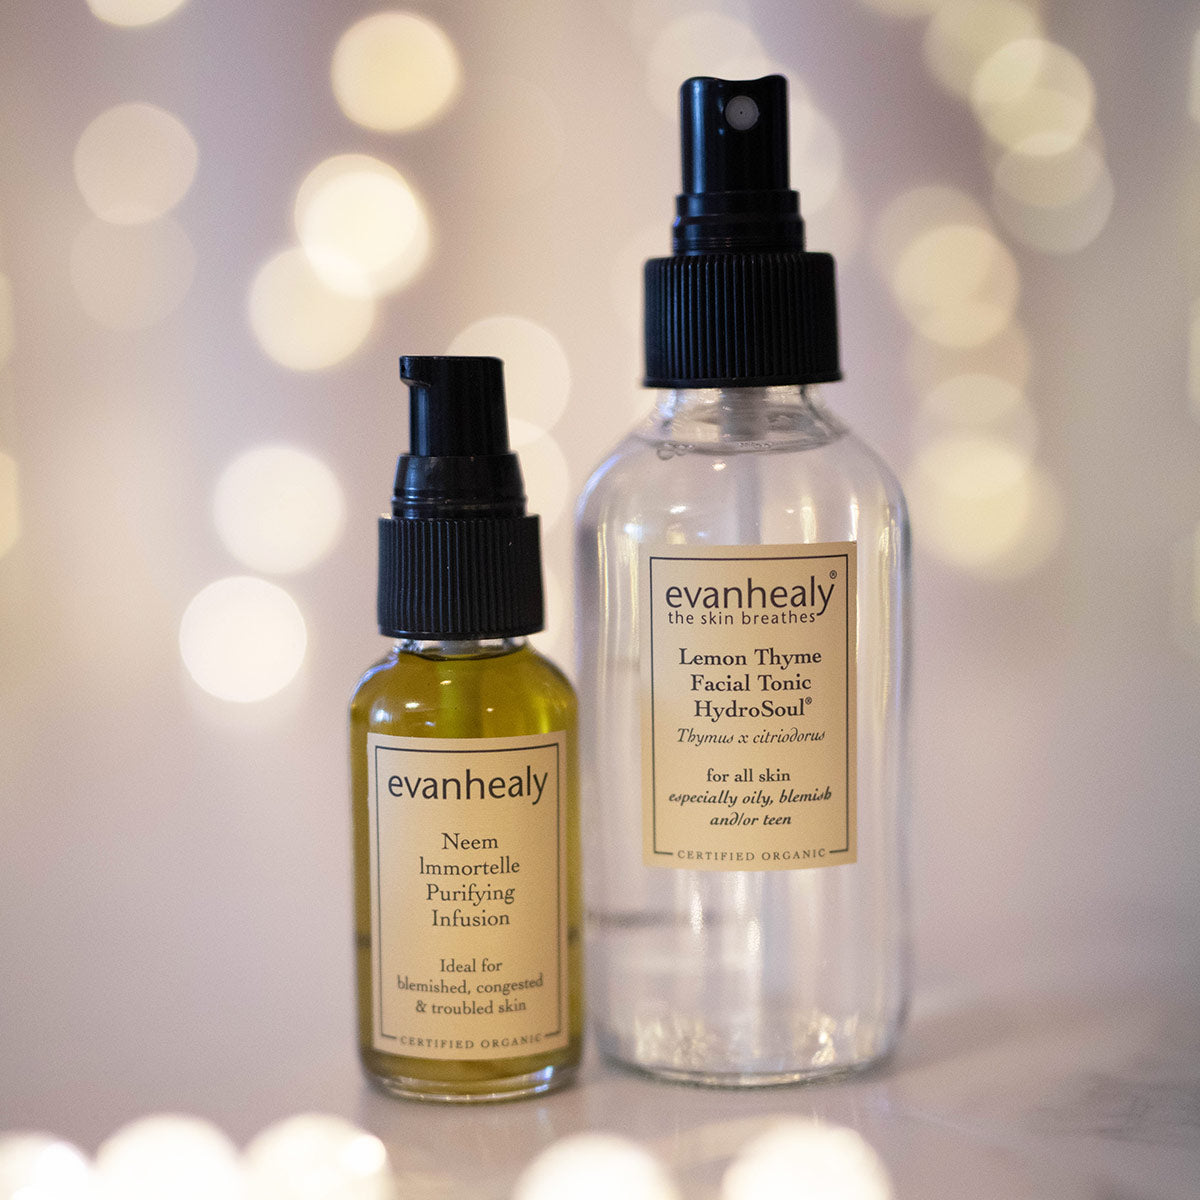 neem immortelle purifying infusion oil serum and lemon thyme hydrosol